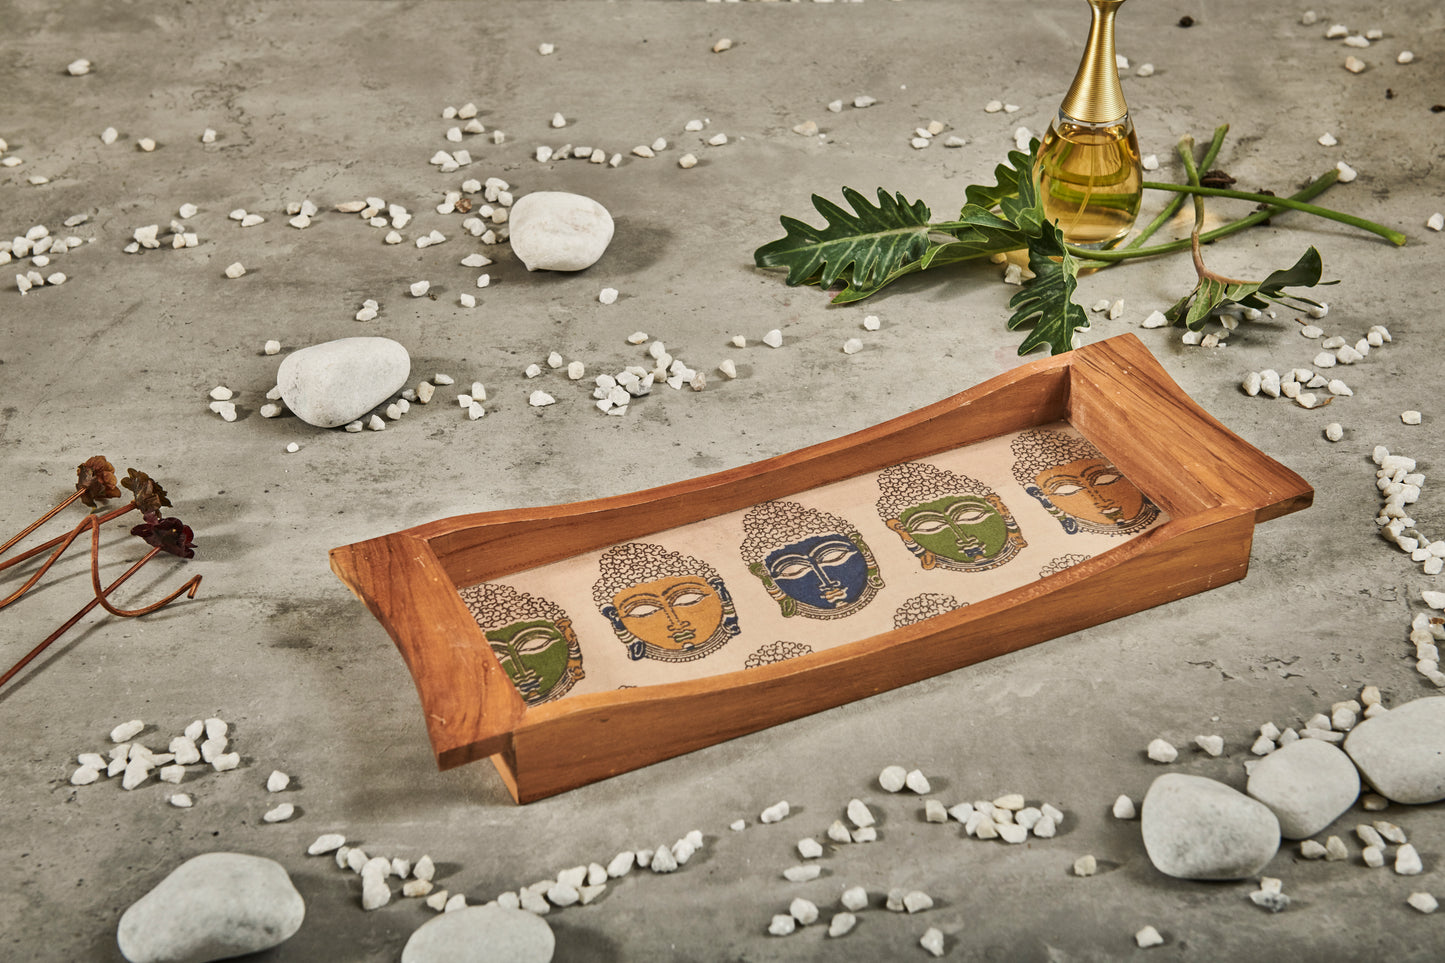 A Tiny Mistake Colourful Buddha Faces on Cream Base Boat Shaped Teak Serving Tray, Tray for Serving Tea and Snacks, 35 x 15 x 4 cm